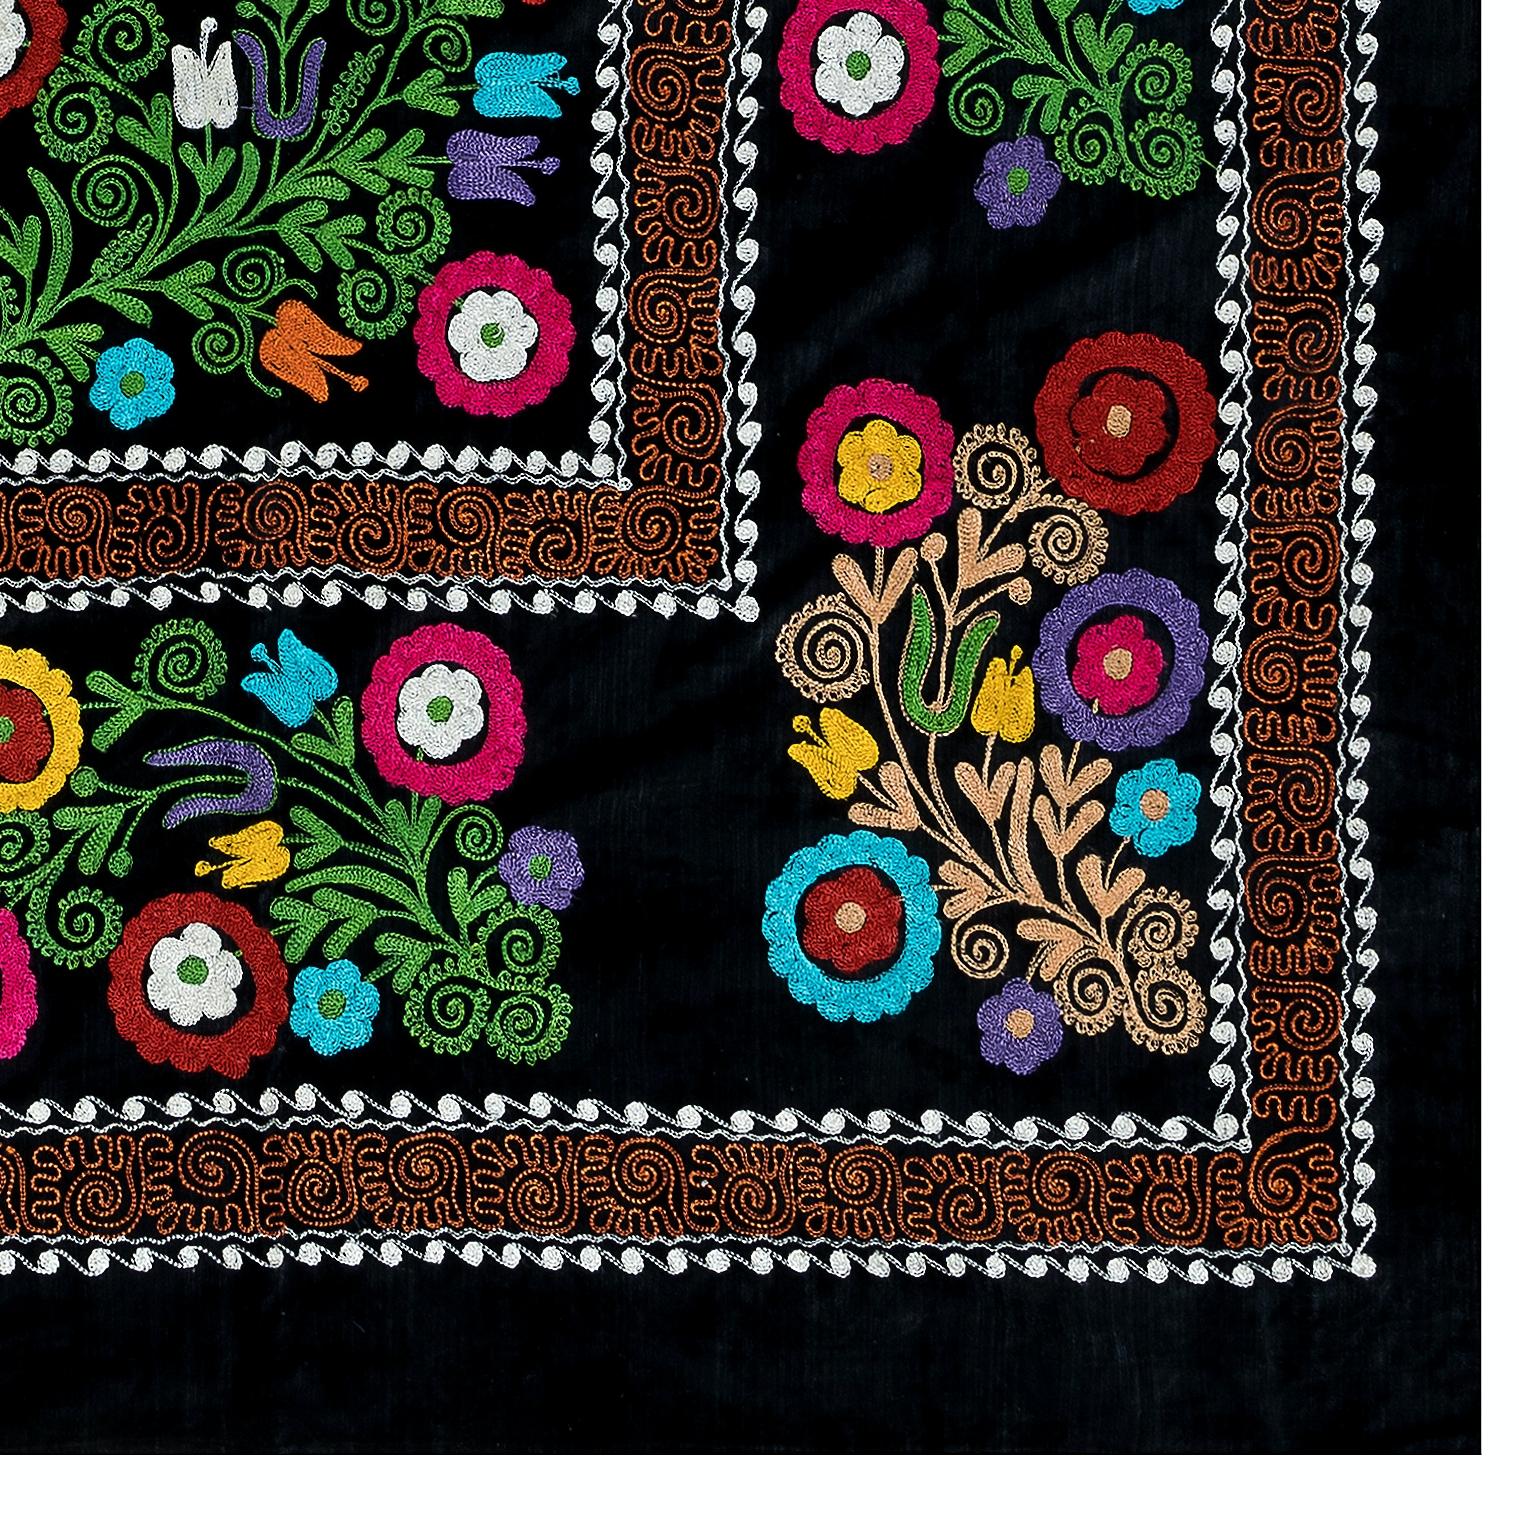 Embroidered 4.3x6.8 Ft Silk Embroidery Bed Cover, Black Wall Hanging, Vintage Suzani Throw For Sale